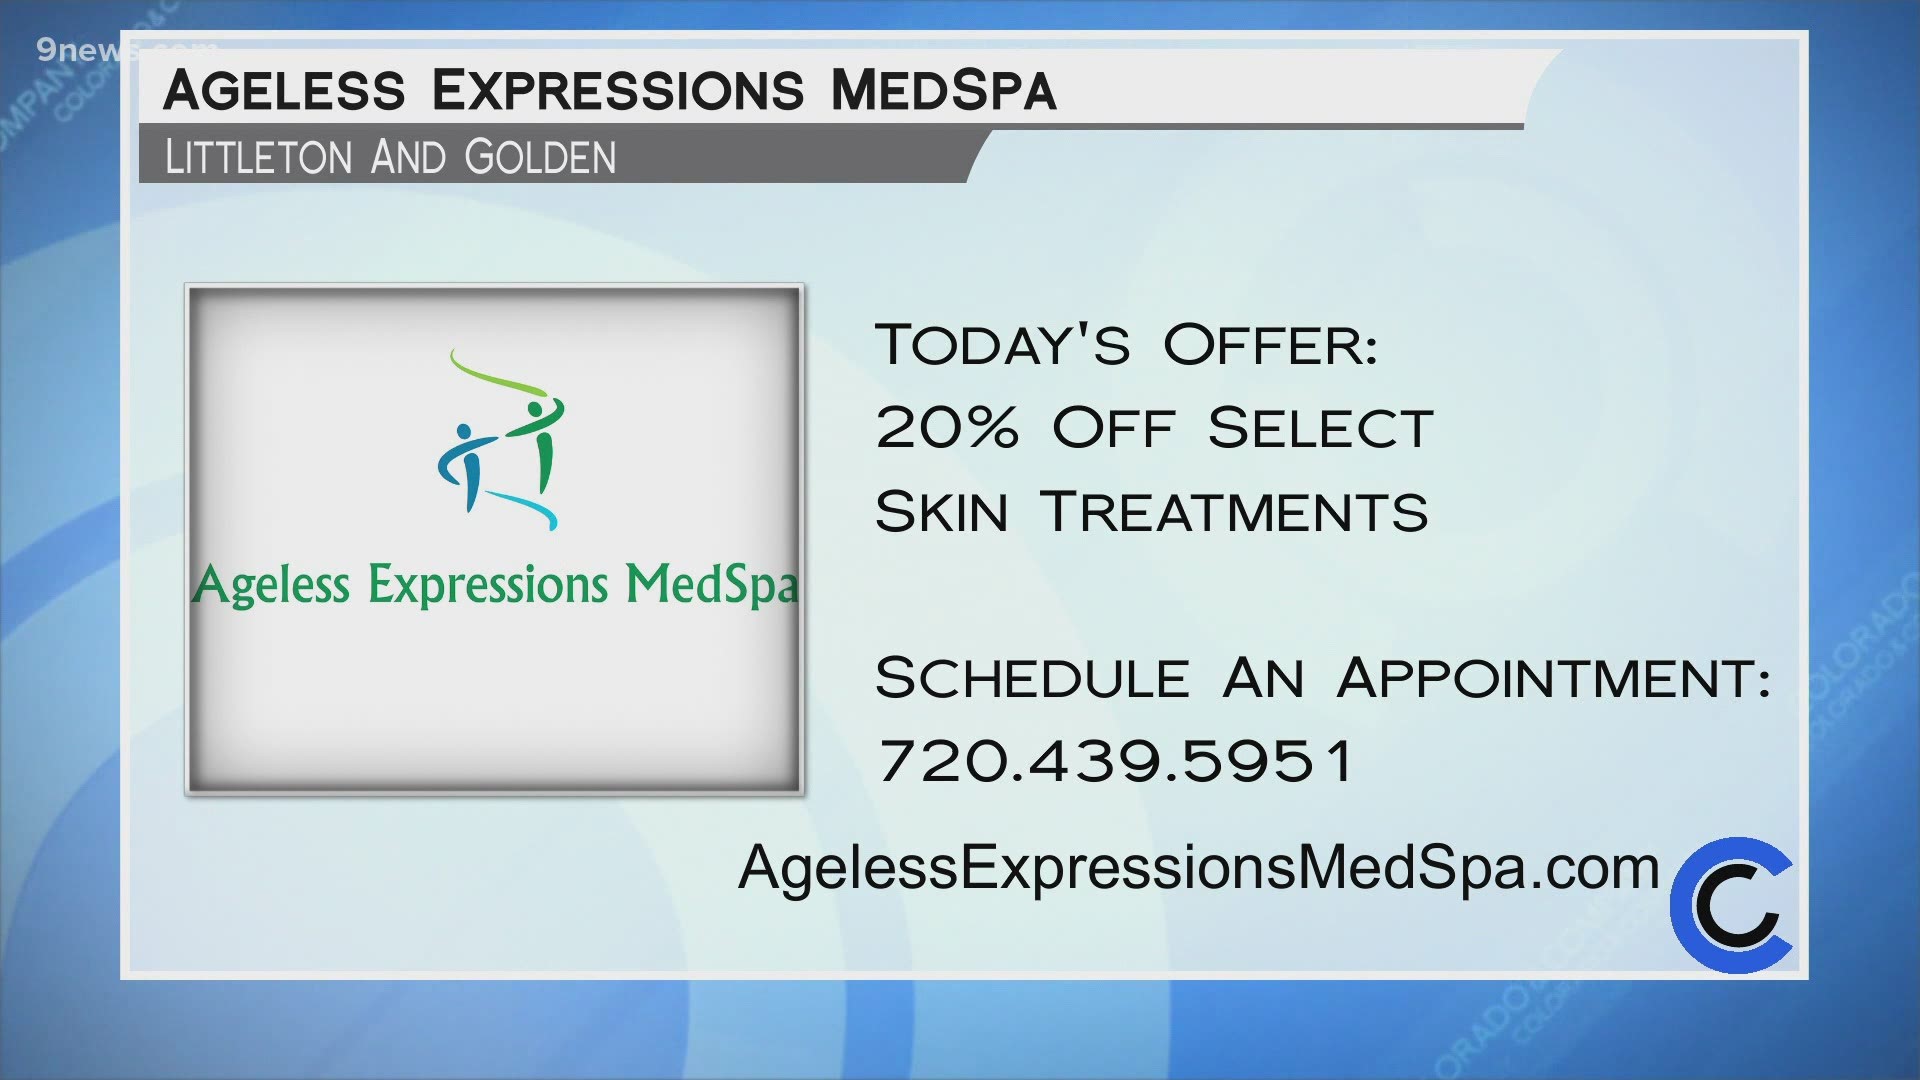 Call 720.439.5951 to set up your free consultation with Ageless Expressions. You can also take 20% off your treatment! Learn more at AgelessExpressionsMedSpa.com.